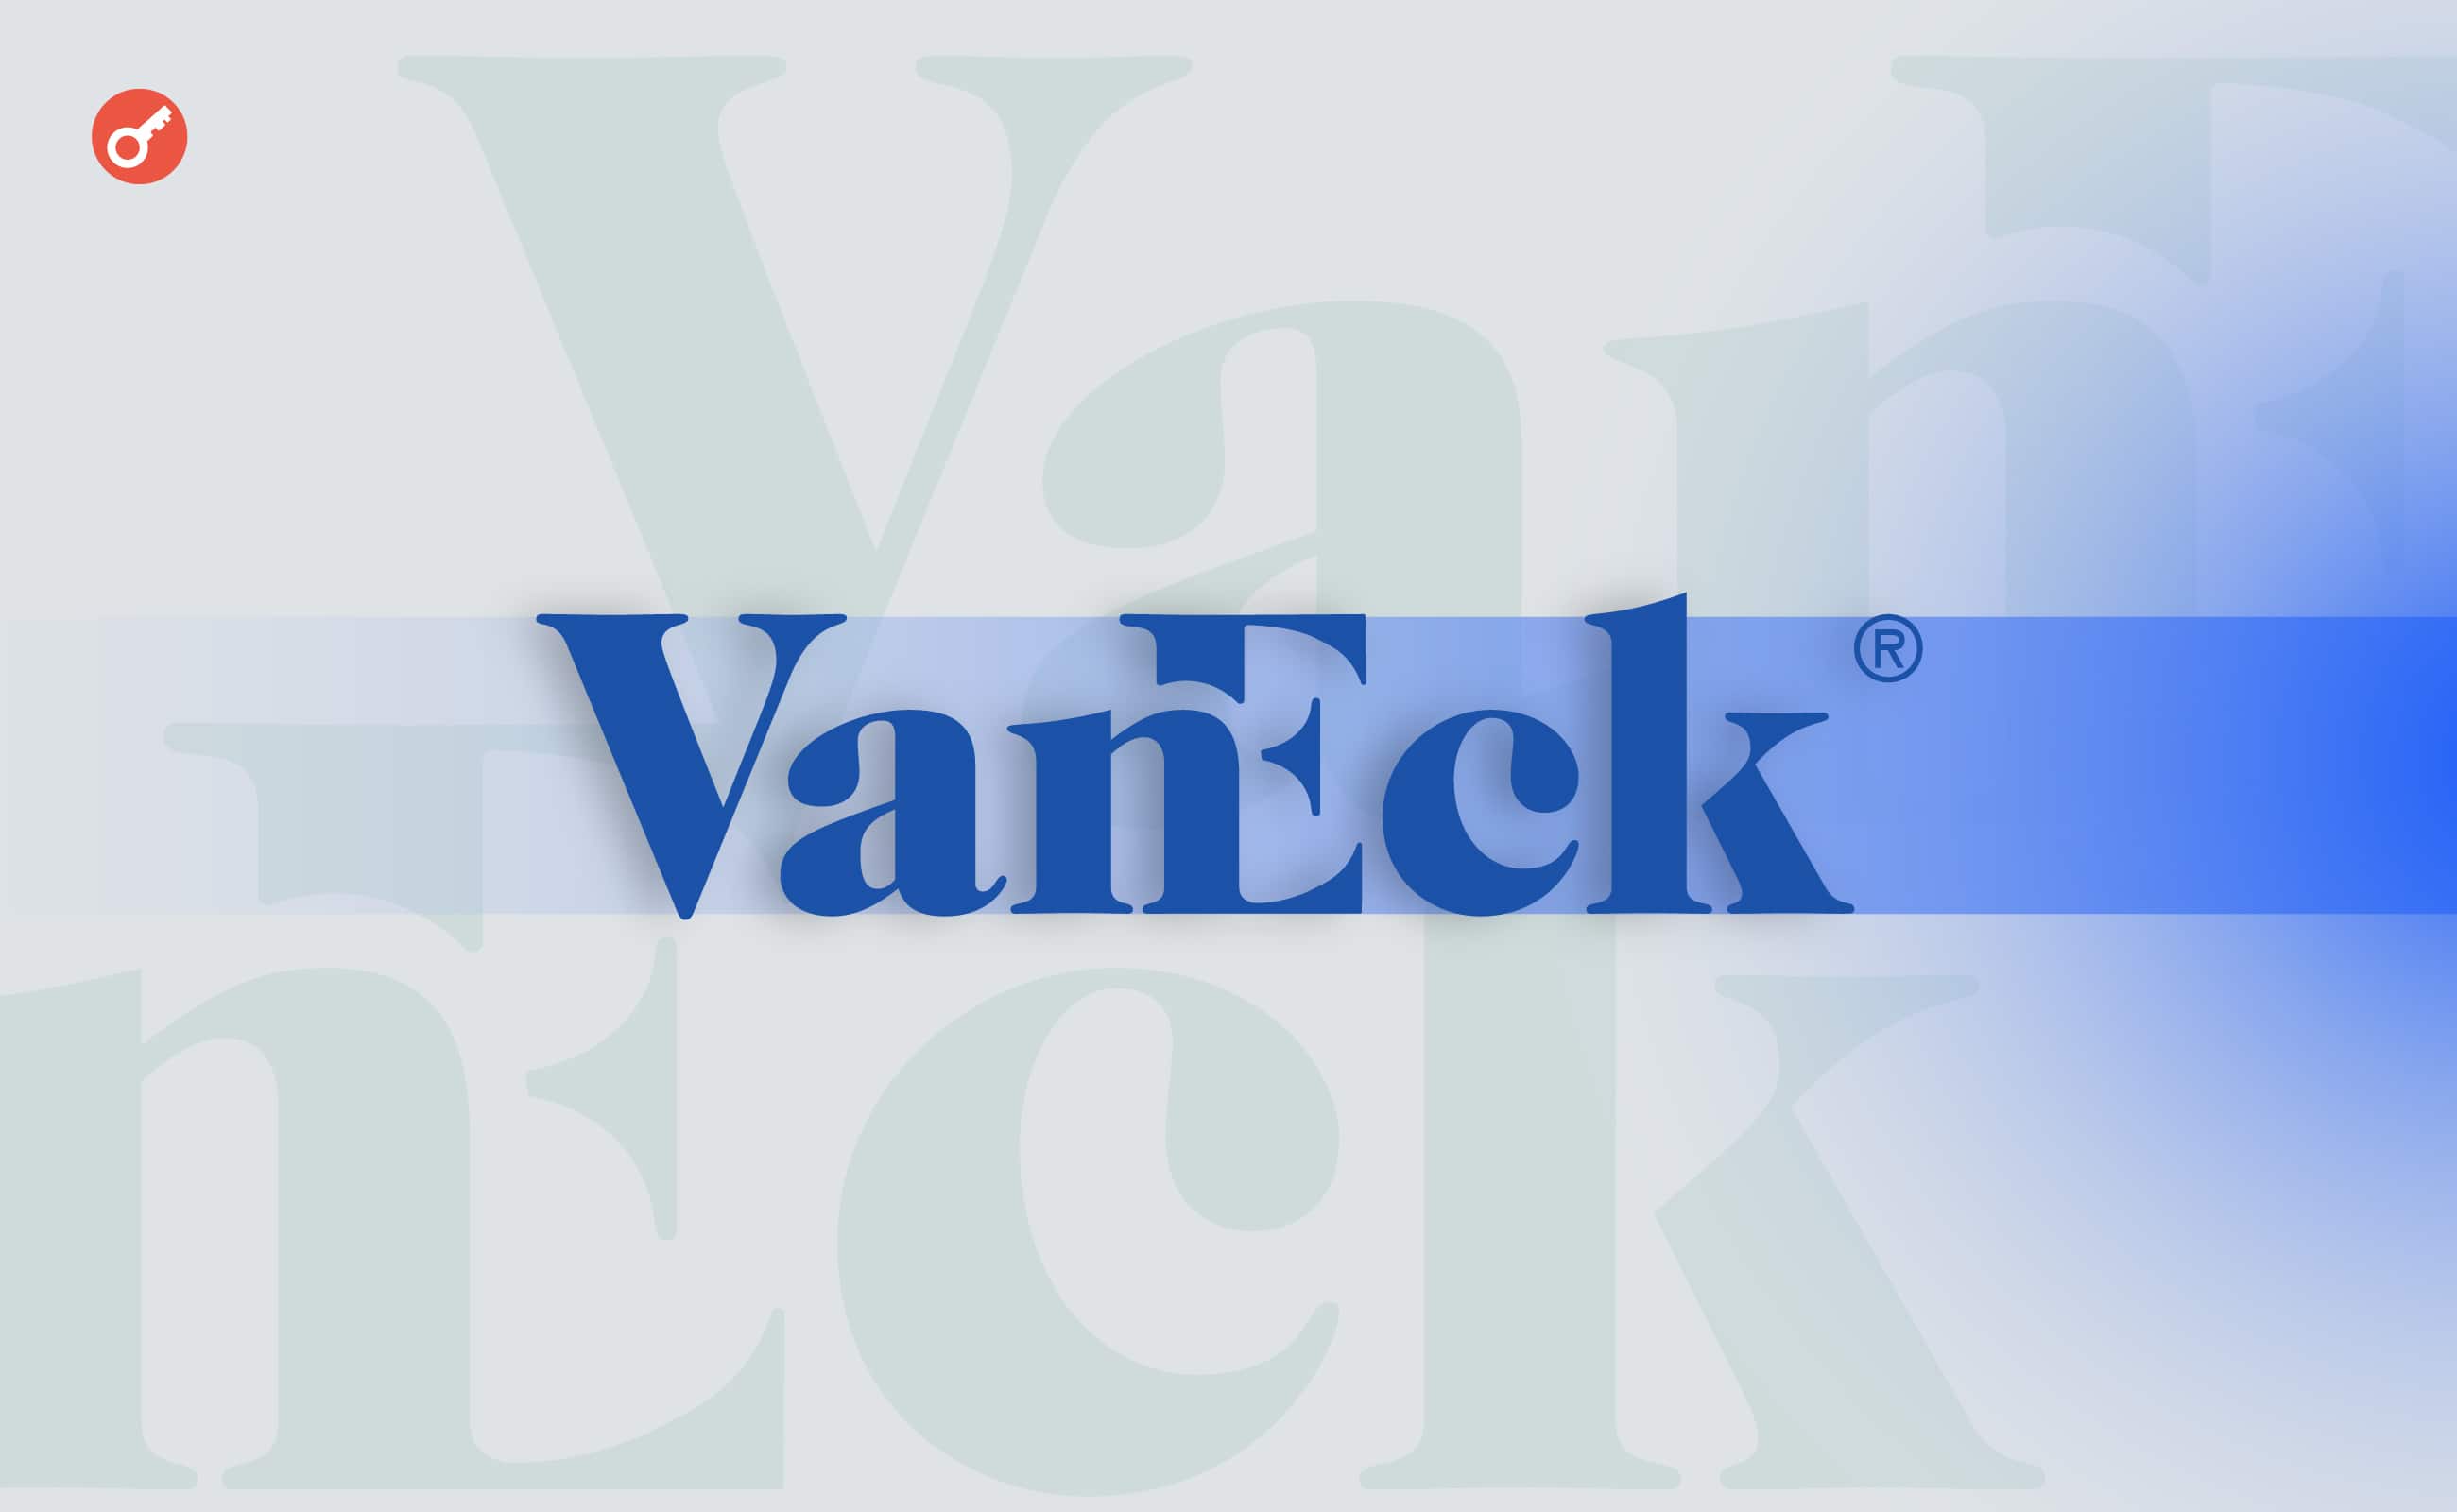 VanEck has reduced the commission in its spot Bitcoin ETF to zero